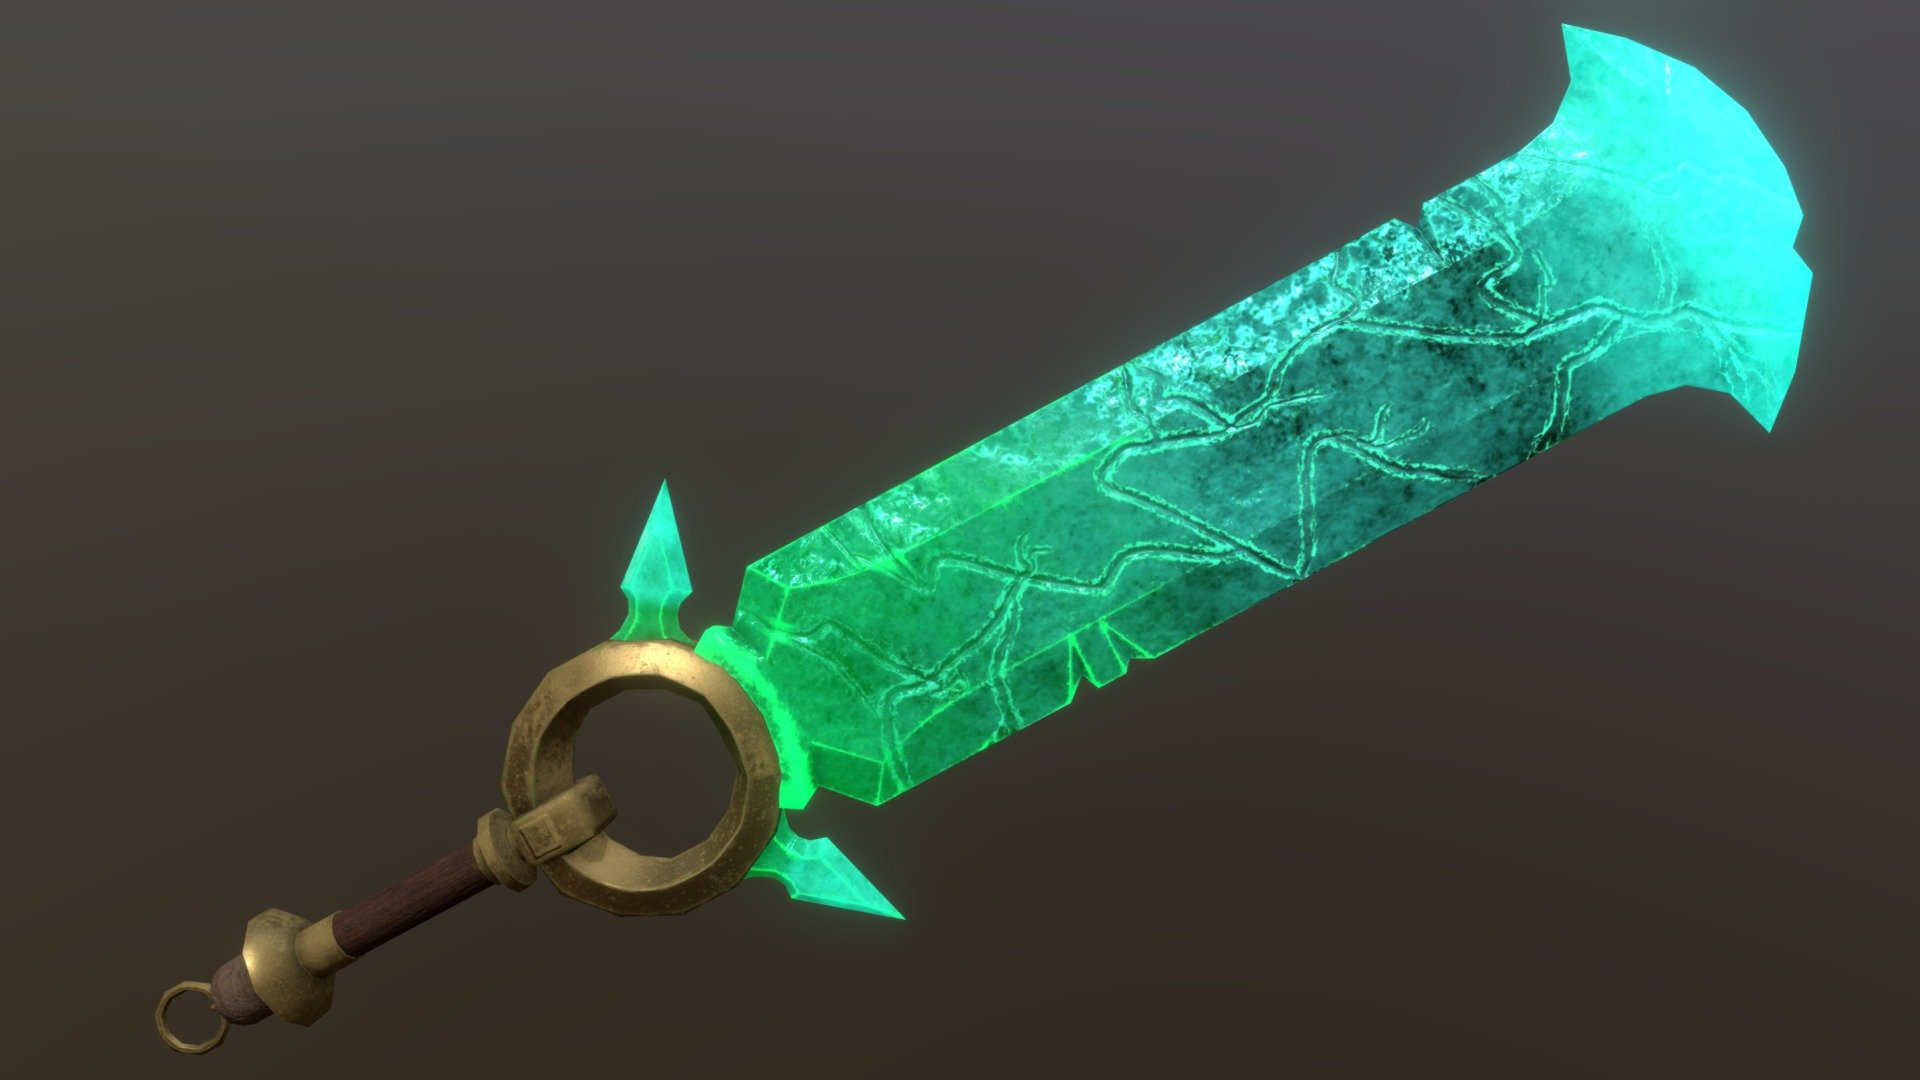 A Jade sword made based on a image i saw on pinterest. I Modeled it on Maya and then texturized it on Substance painter 3d model